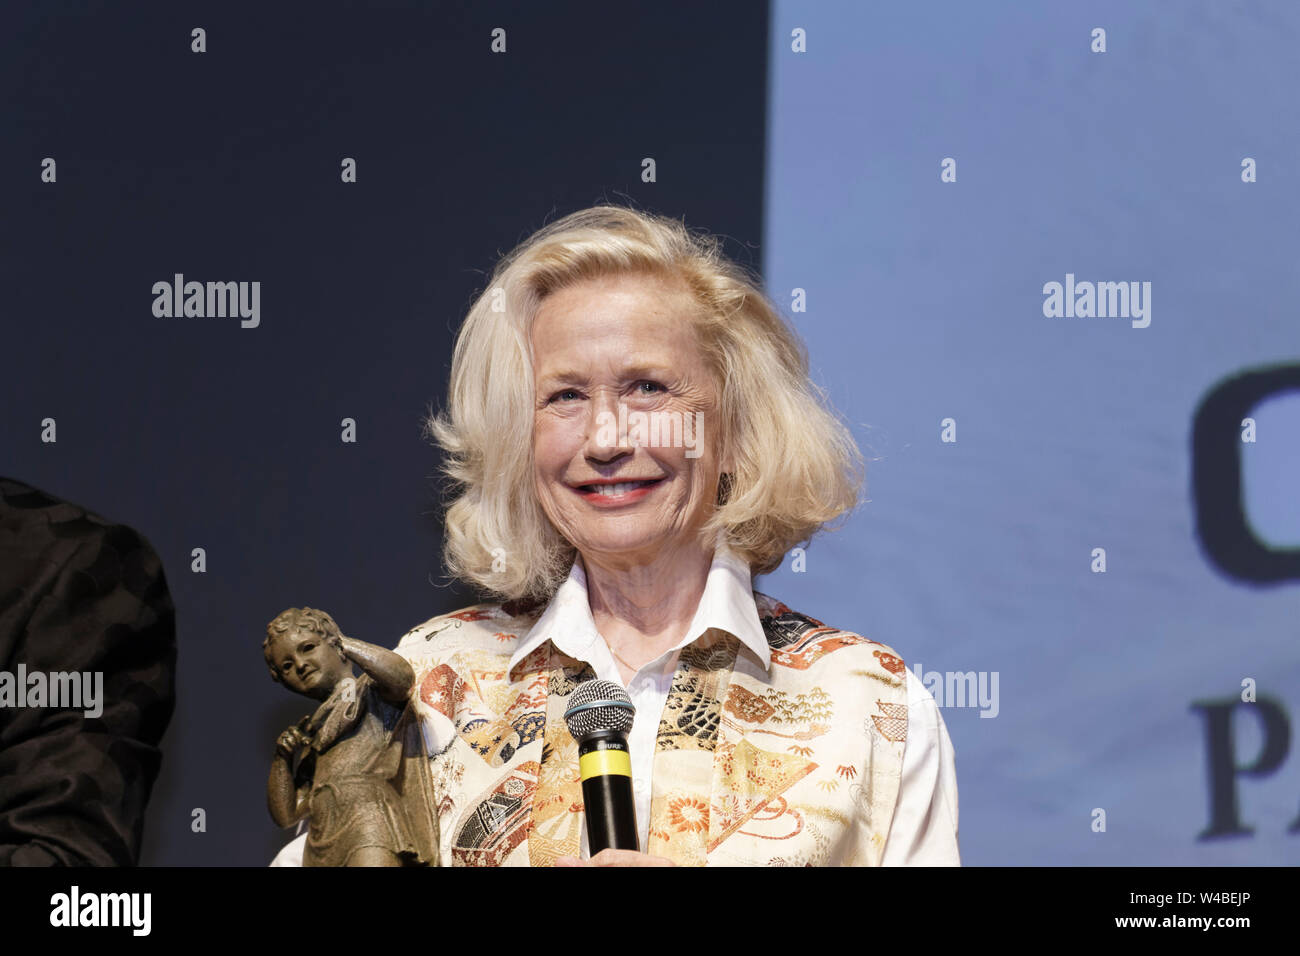 Cap of Agde, France. 21th June, 2019. Day 4 - Brigitte Fossey - The Herault of Cinema and TV, 2019. © Veronique Phitoussi/Alamy Stock Photos Stock Photo